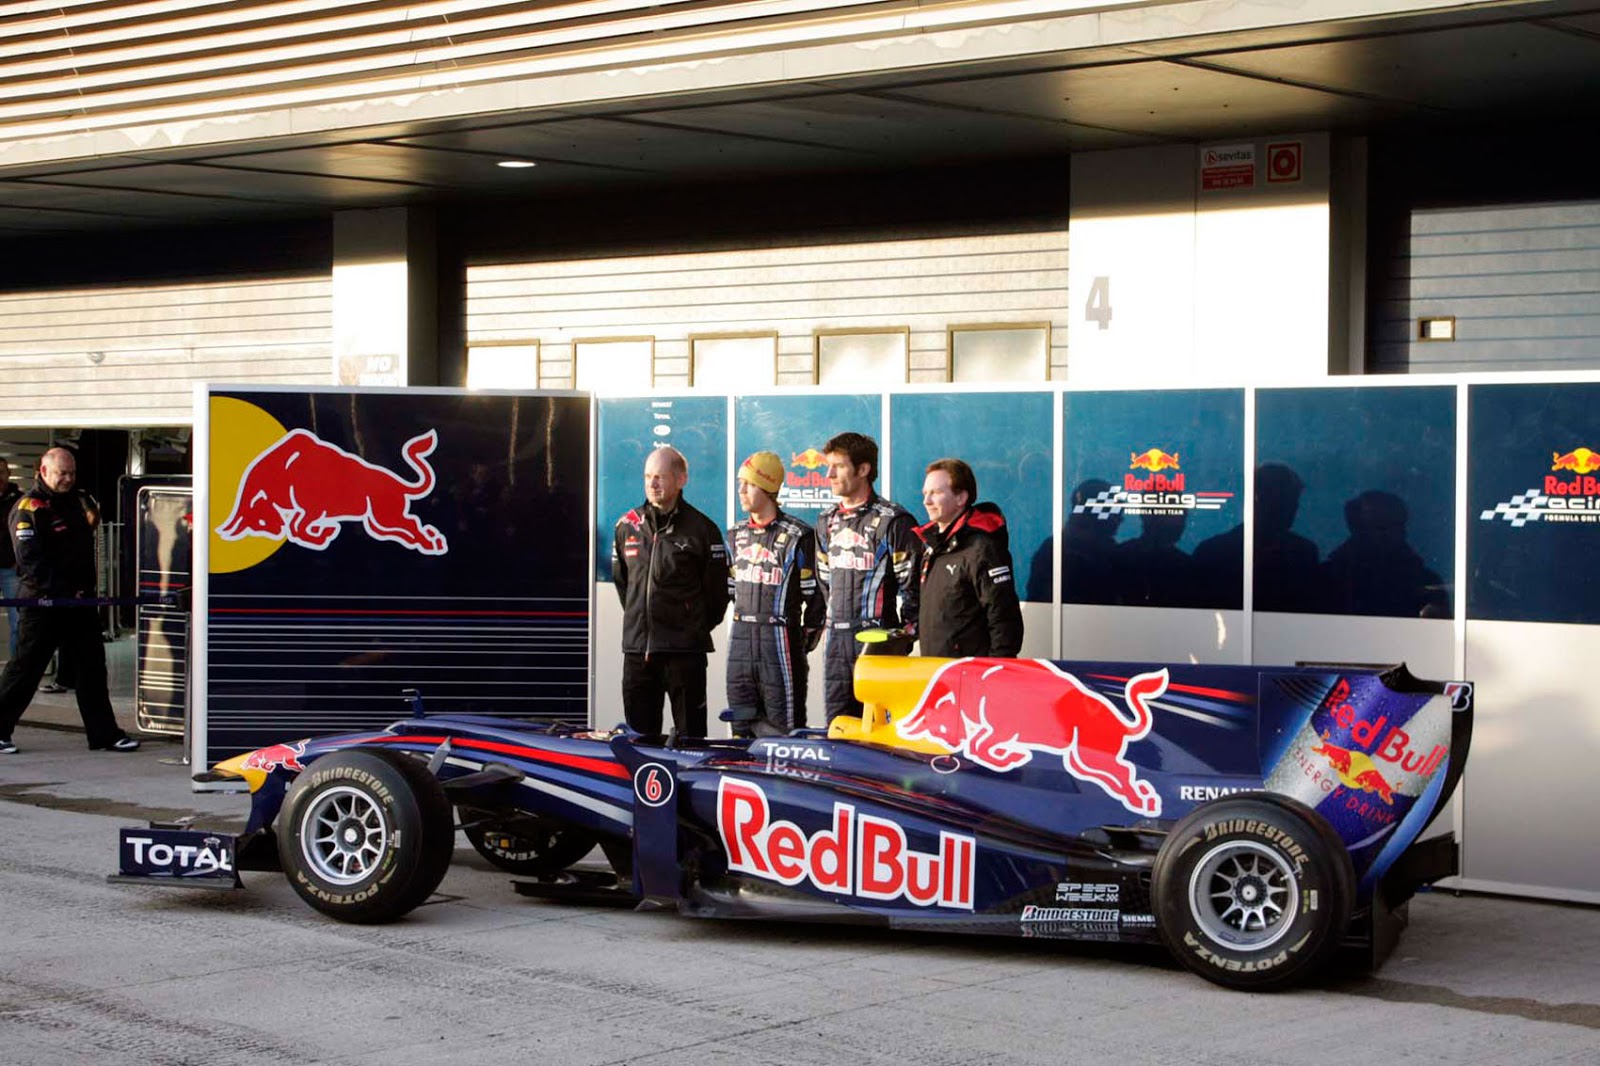 F1 FOLLOWER: Red Bull presents the new Red Bull RB7 in Valencia!!